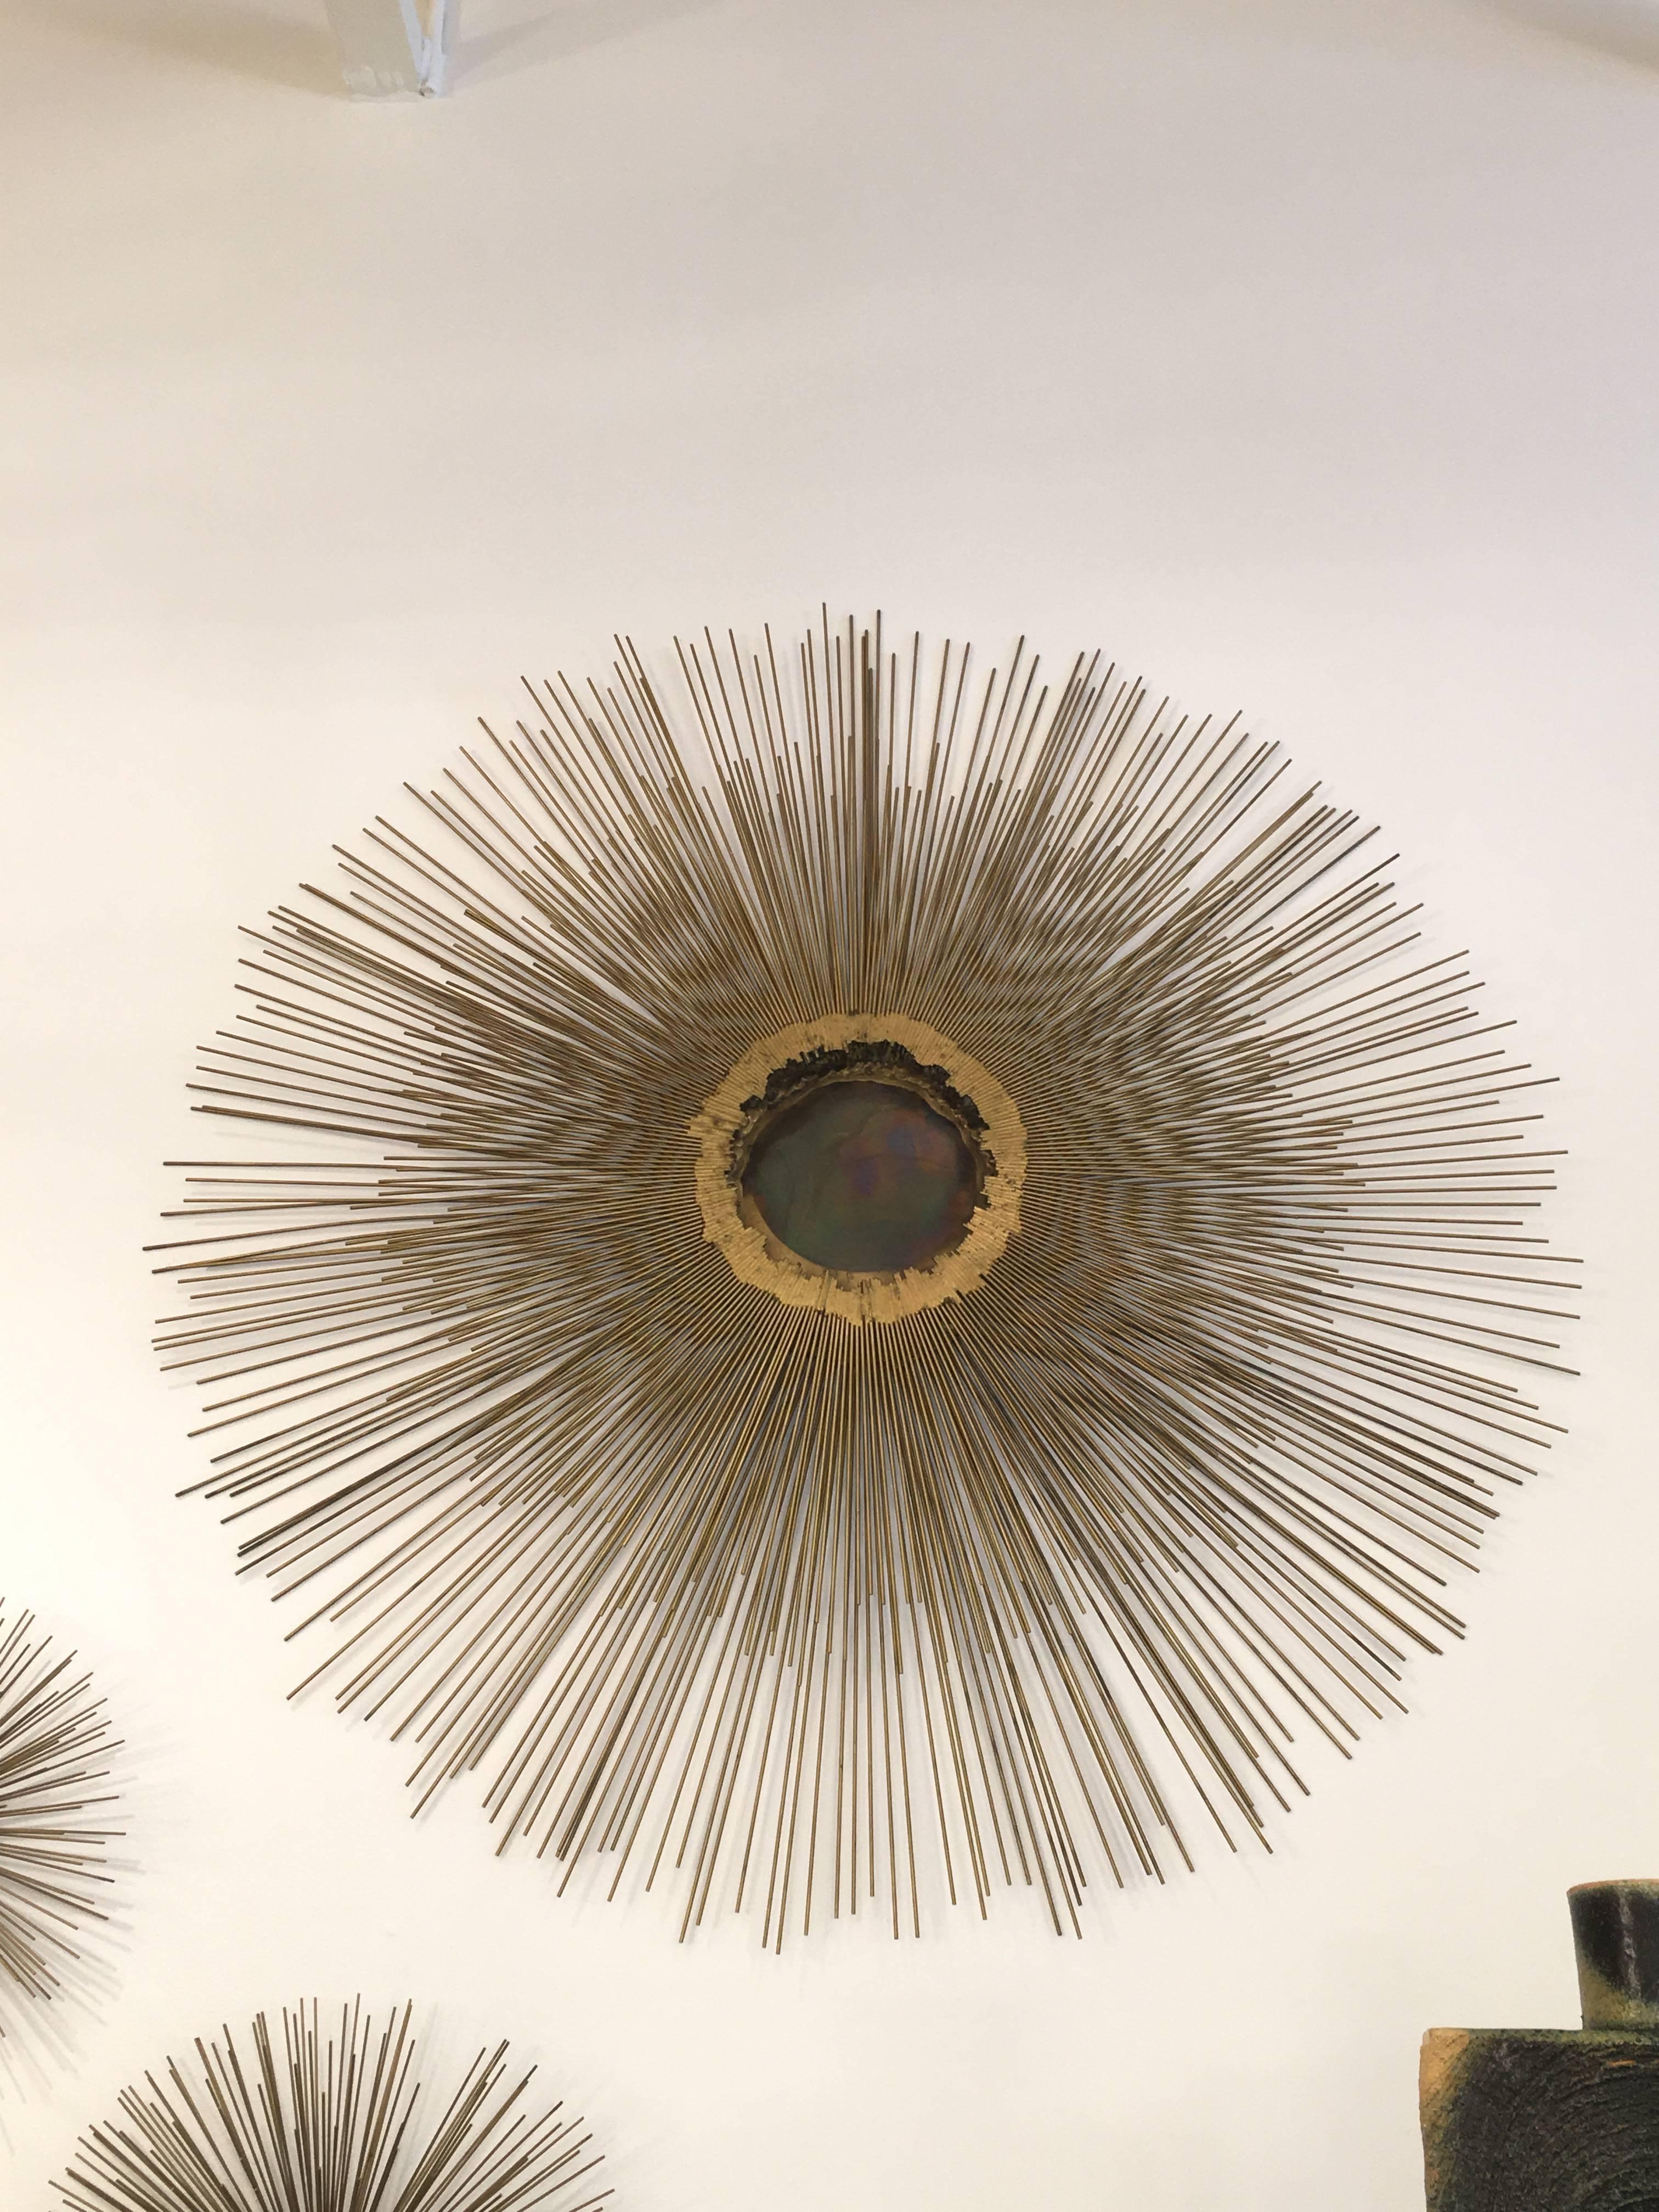 Sculptural set of large vintage brass wall-mounted art - the largest being the sunburst with soldered brass corona. The two-sea urchin design sculptures are of different sizes.

Dimensions: 

Large: Diameter 40 inches, 4 inches deep to wall
Medium